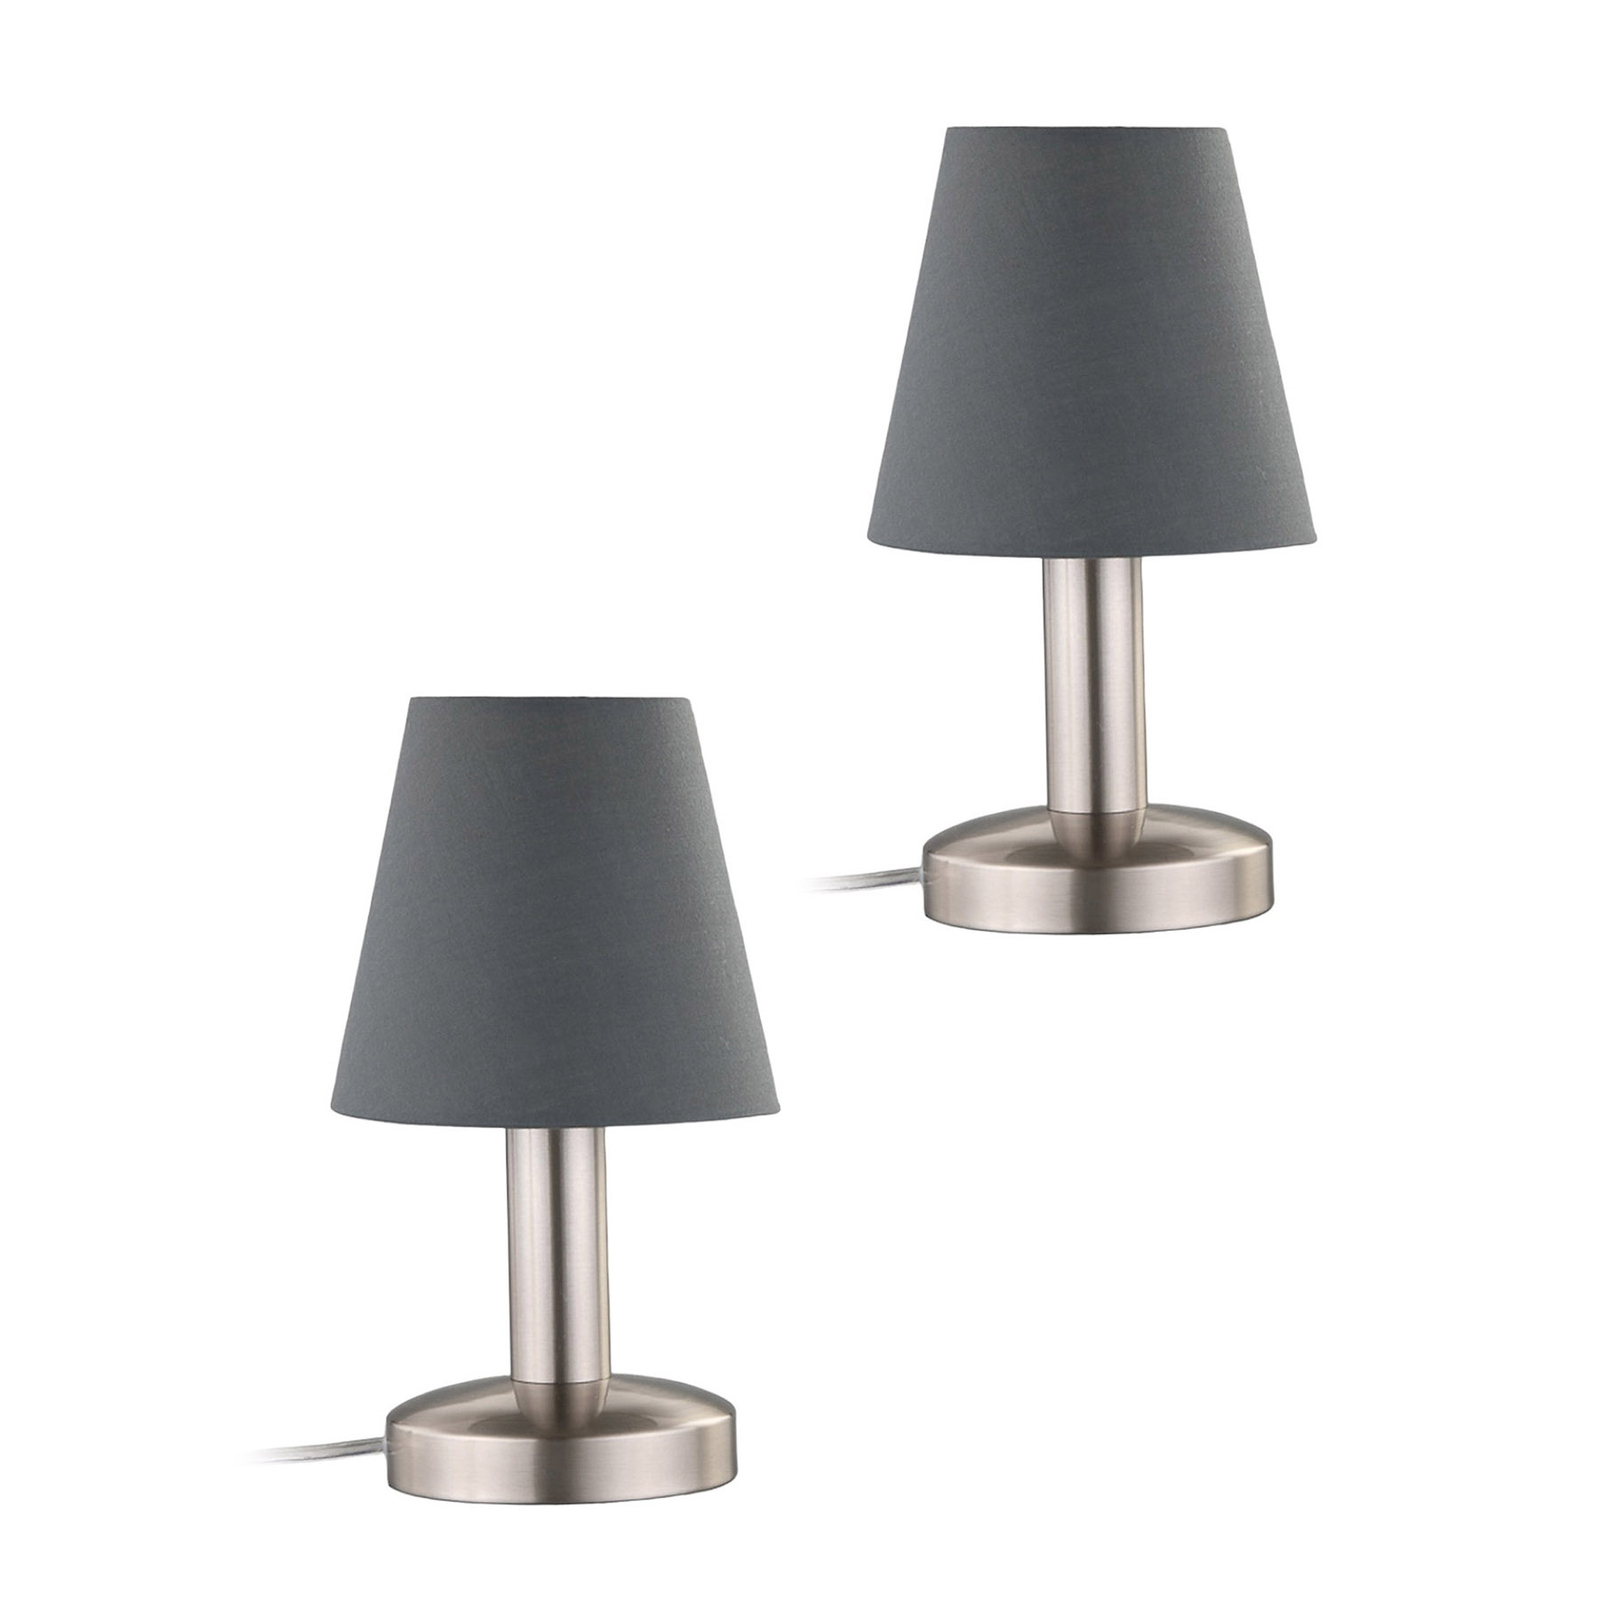 Hanno grey bedside table lamp fabric lampshade 2x